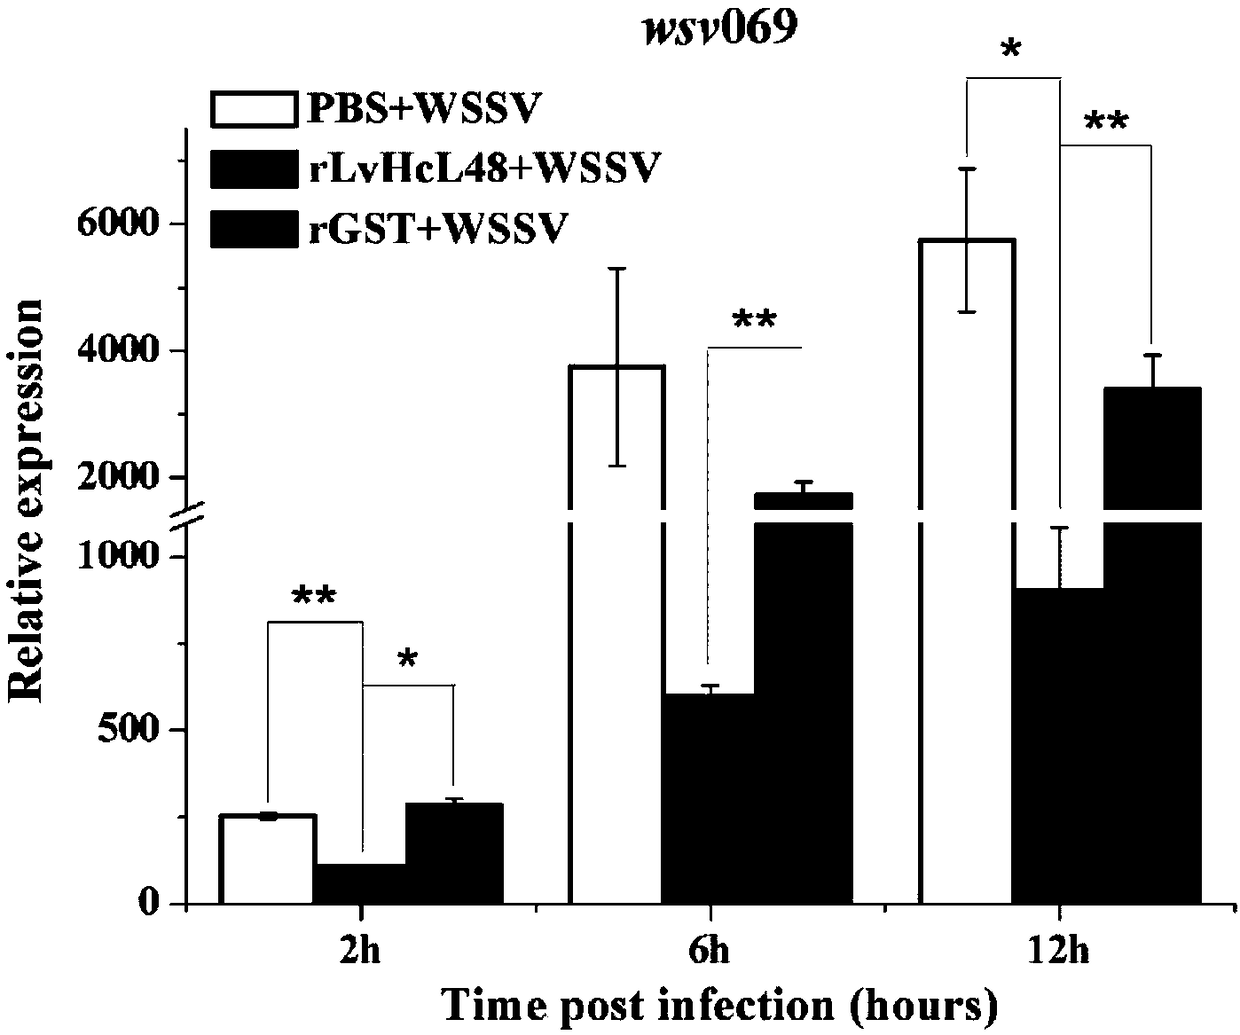 Anti-WSSV (White Spot Syndrome Virus) peptide LvHcL48 derived from litopenaeus vannamei hemocyanin and application thereof